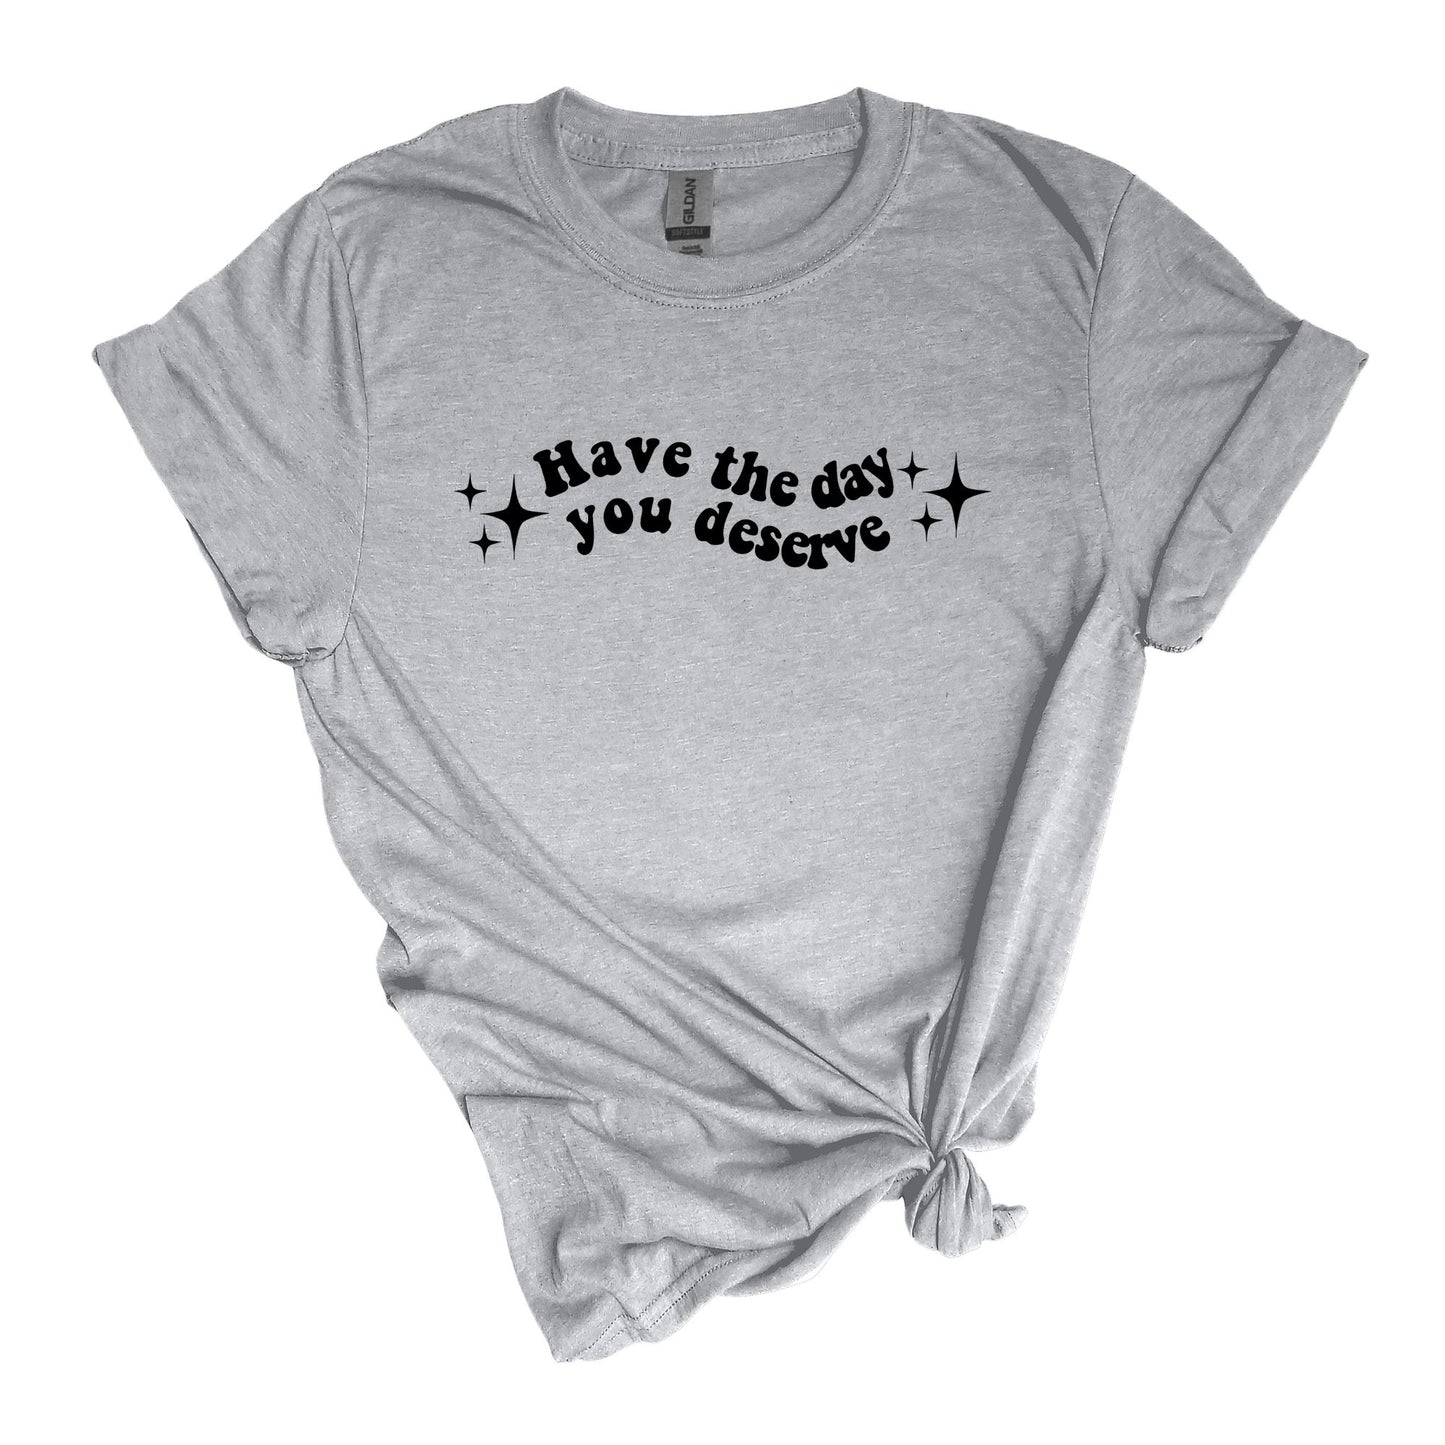 Have the day you deserve - Adult Soft-style T-shirt